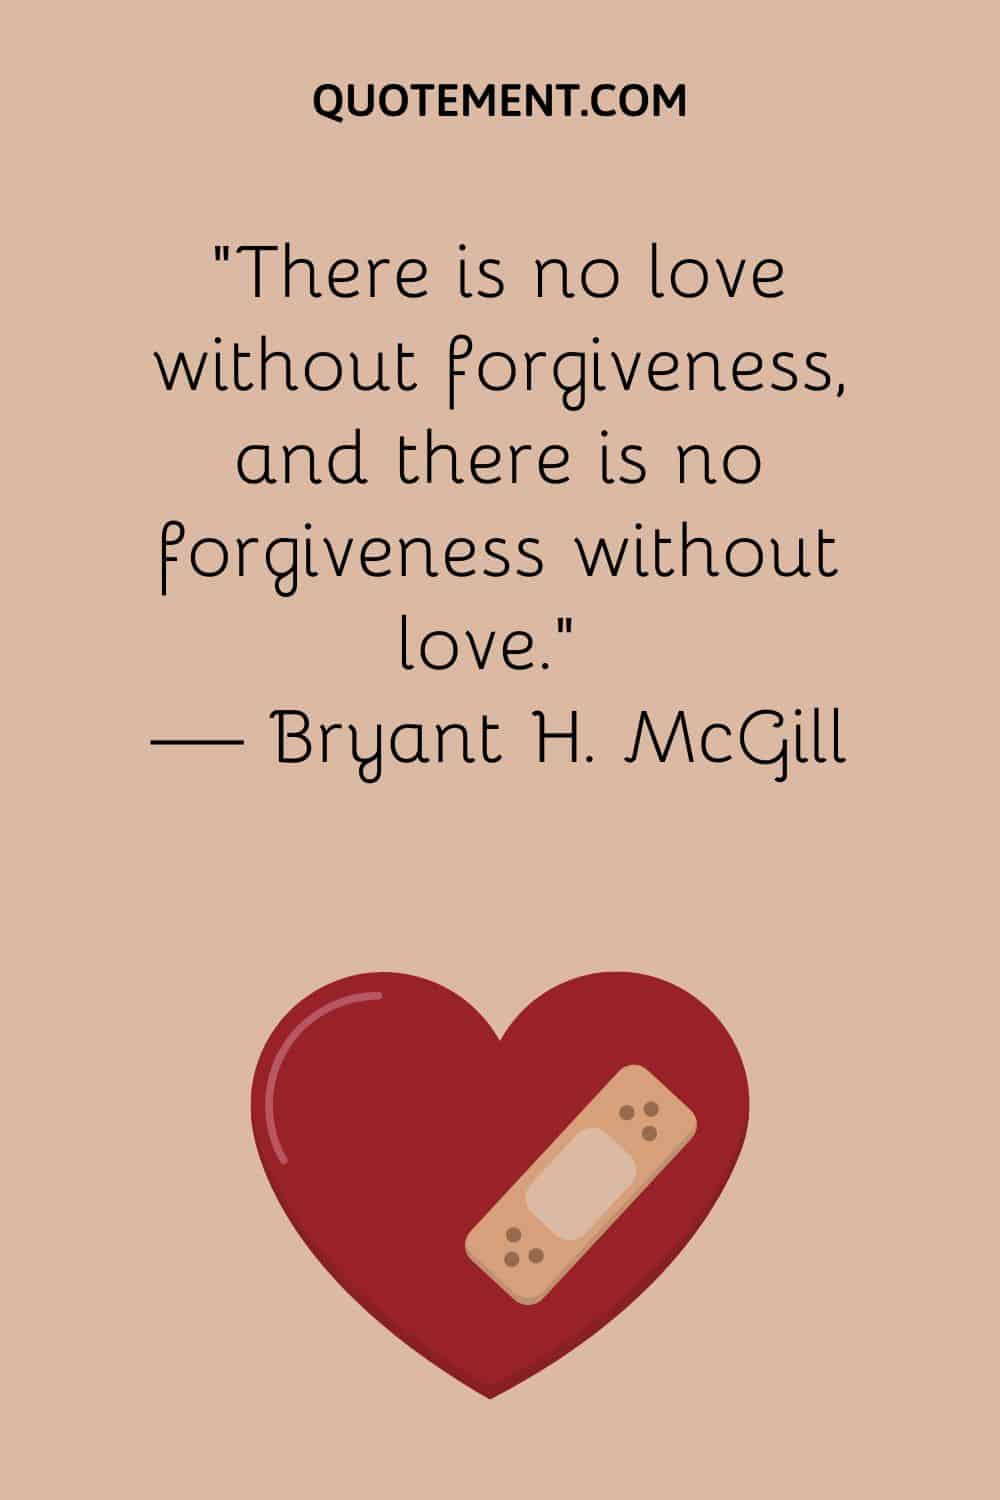 There is no love without forgiveness